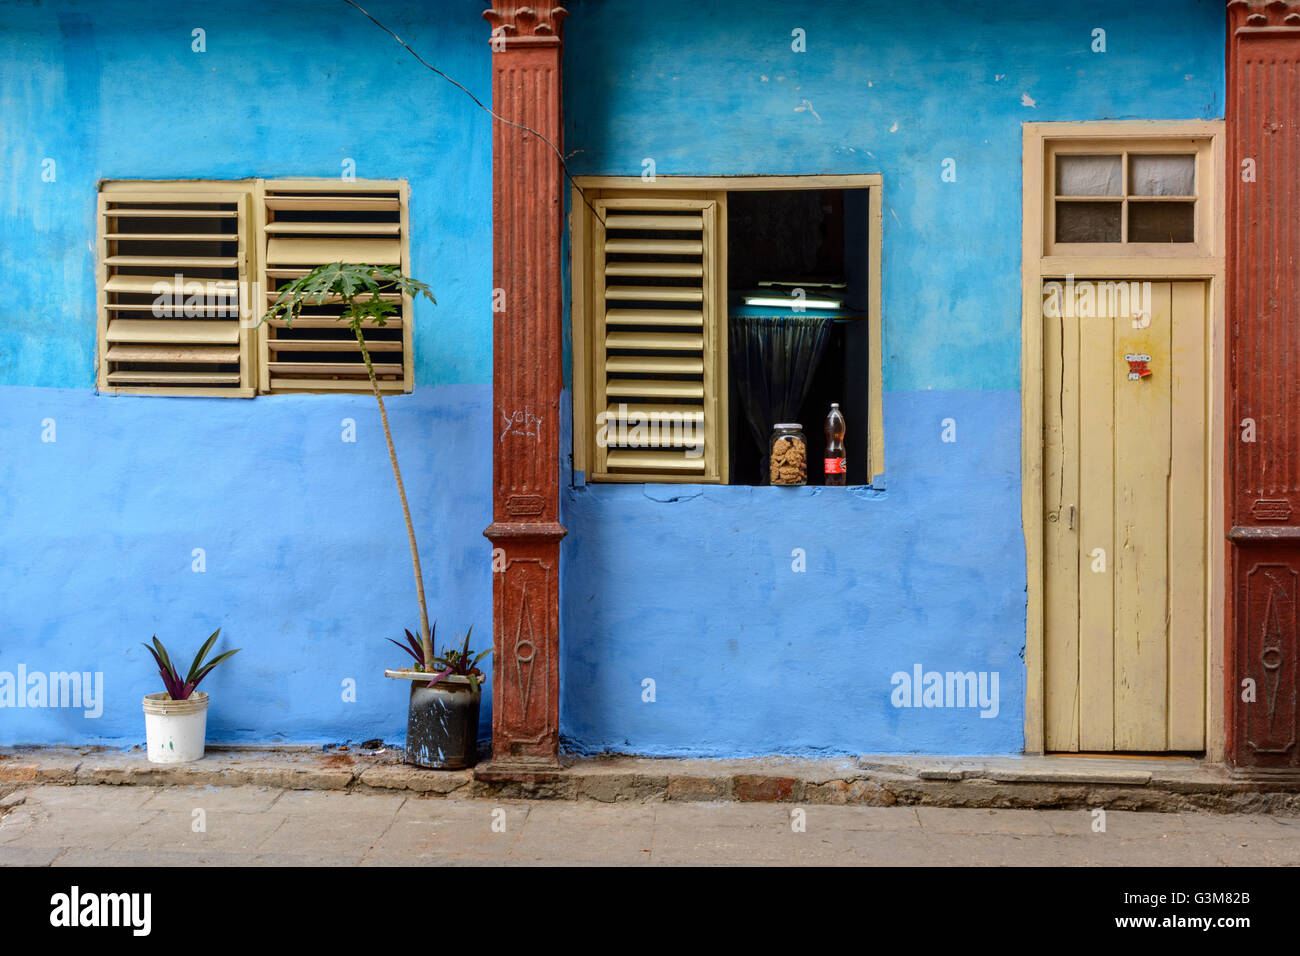 A traditional simple Havanan home in the backstreets of Old Havana, Cuba Stock Photo